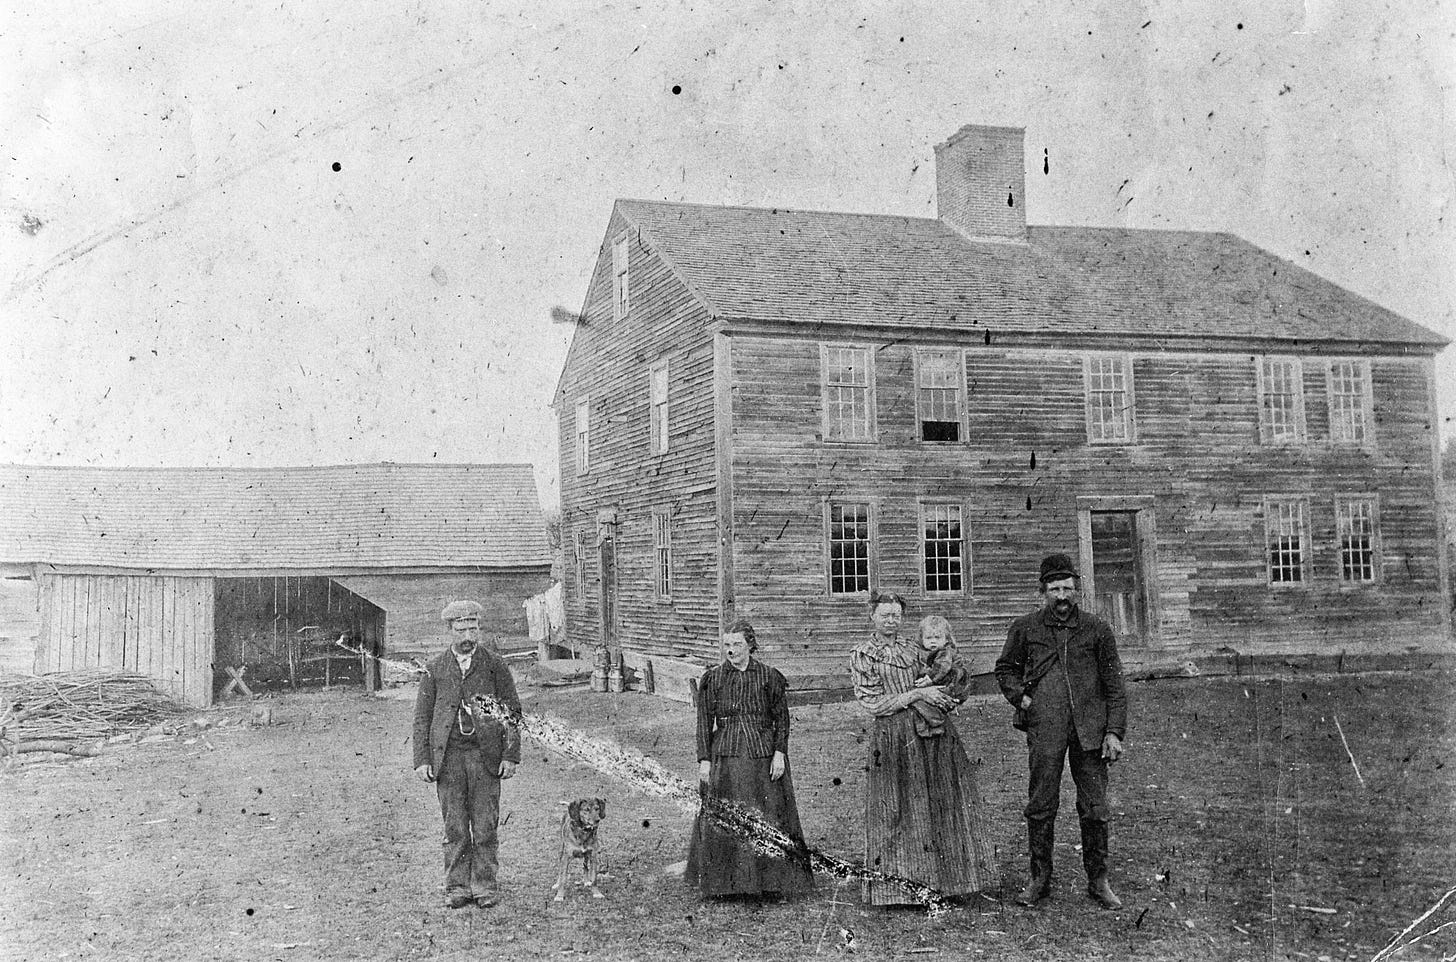 Mansfield family at Whittemore Tavern